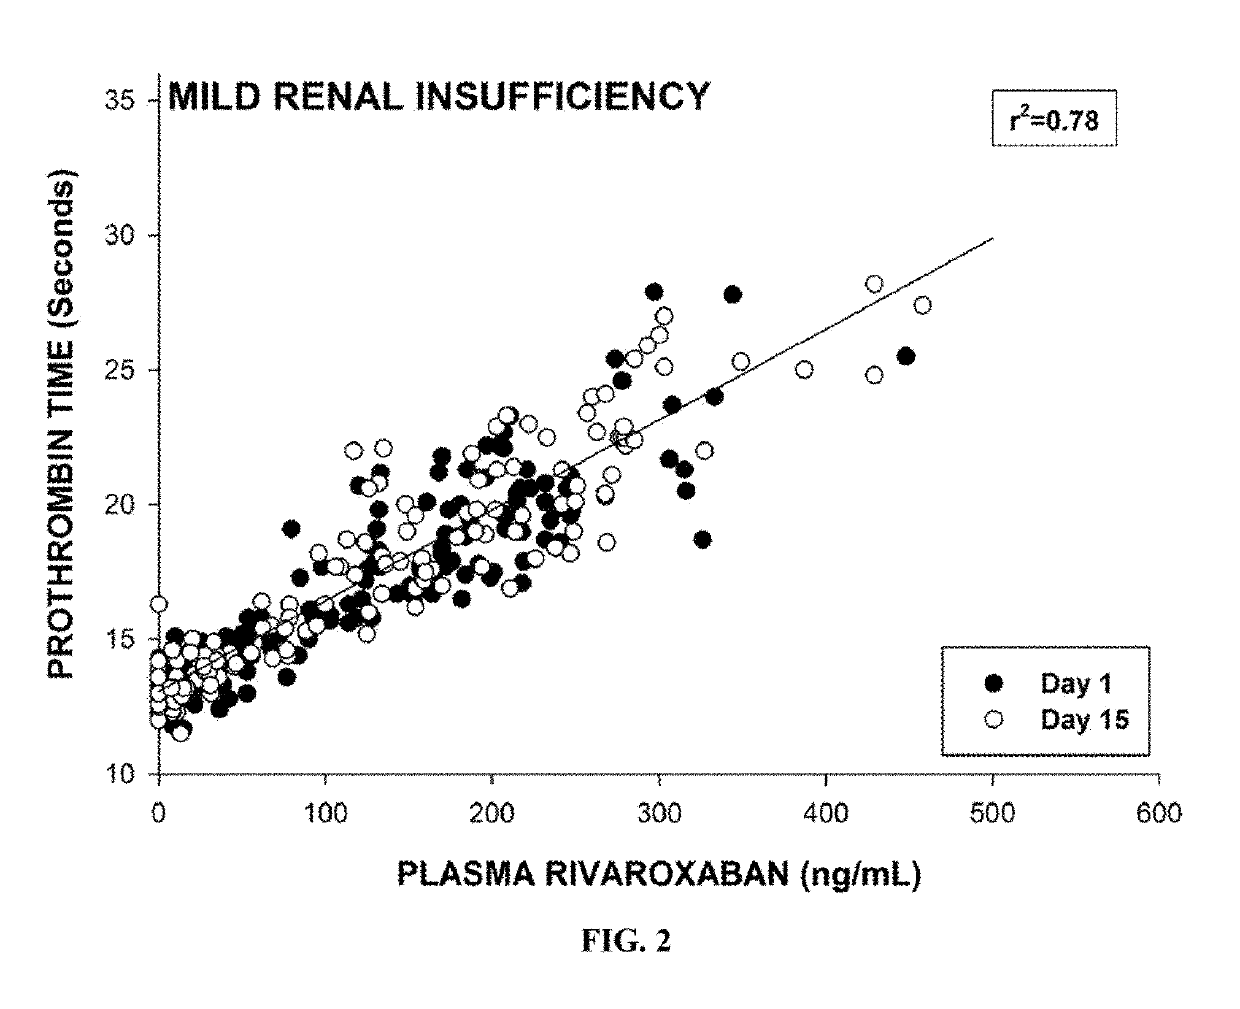 METHOD OF TREATING PATIENTS COADMINISTERED A FACTOR Xa INHIBITOR AND VERAPAMIL